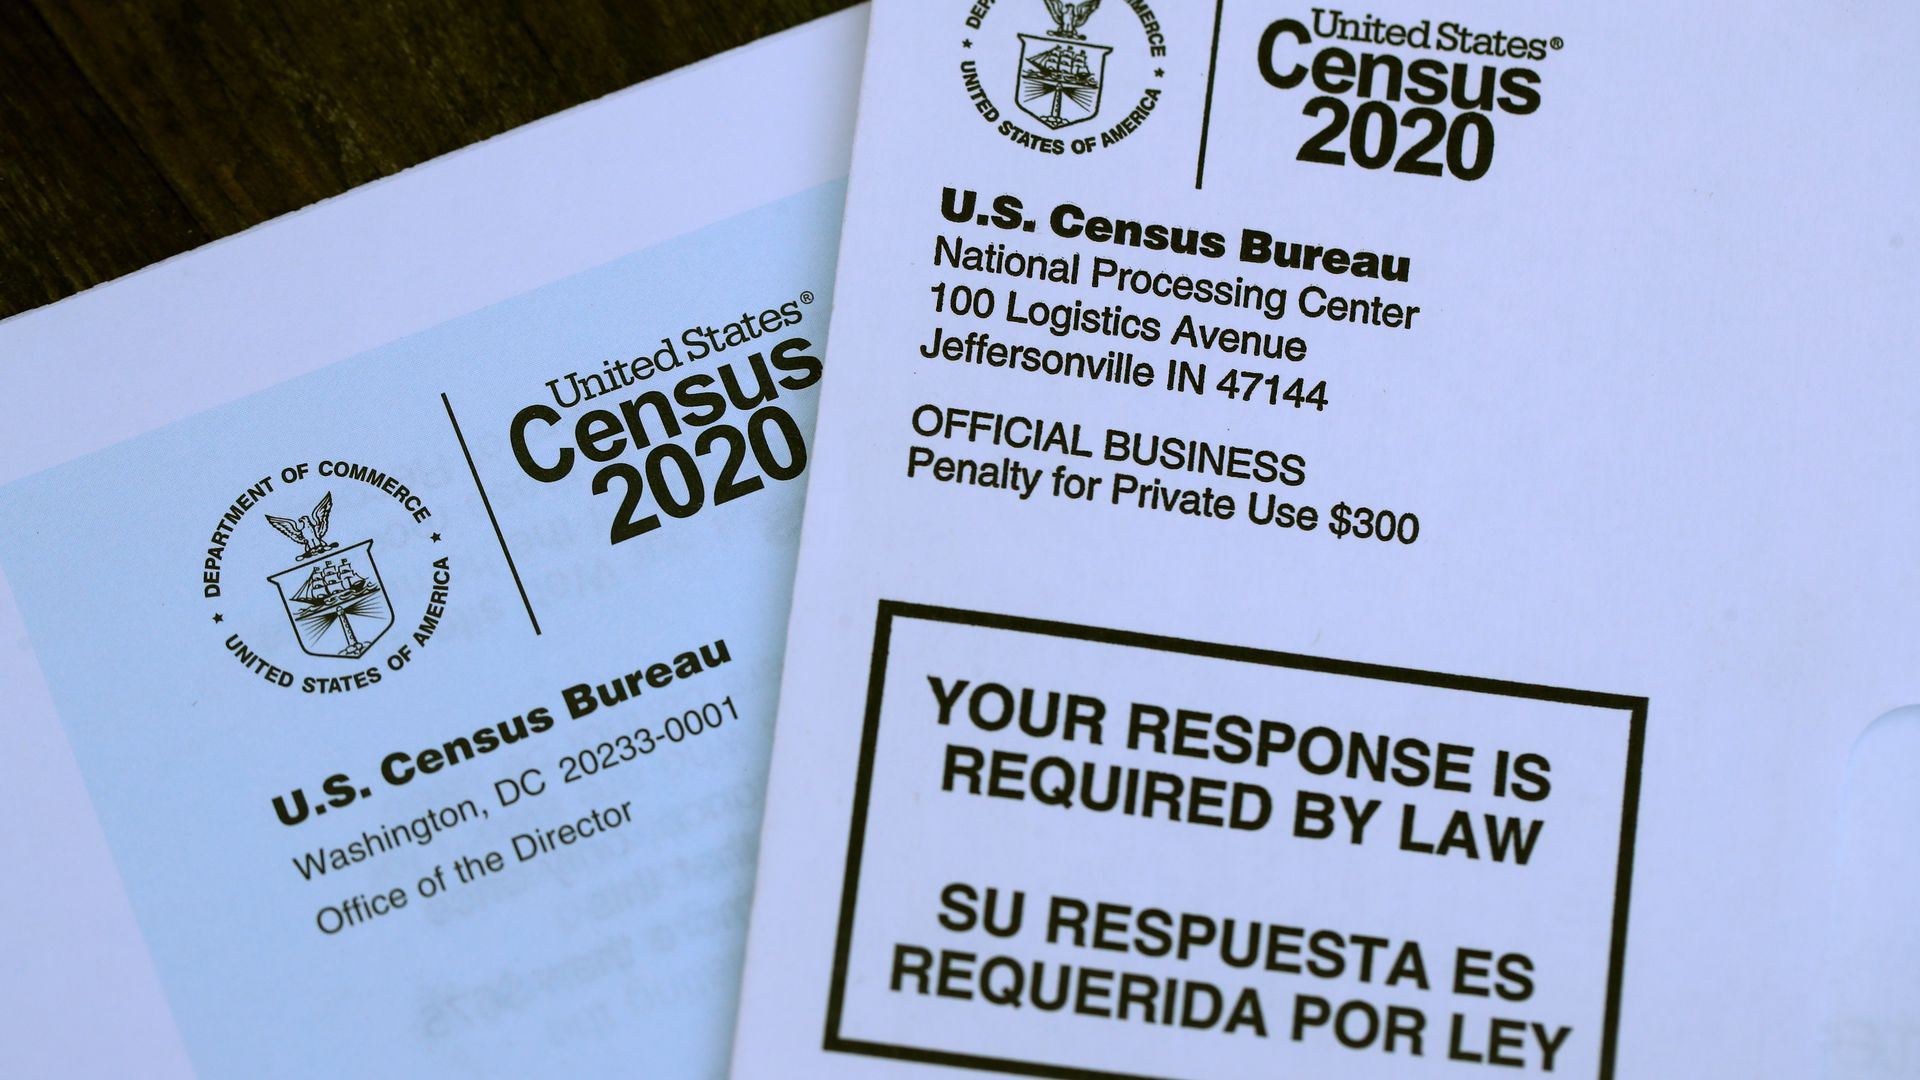  The U.S. Census logo appears on census materials received in the mail with an invitation to fill out census information online